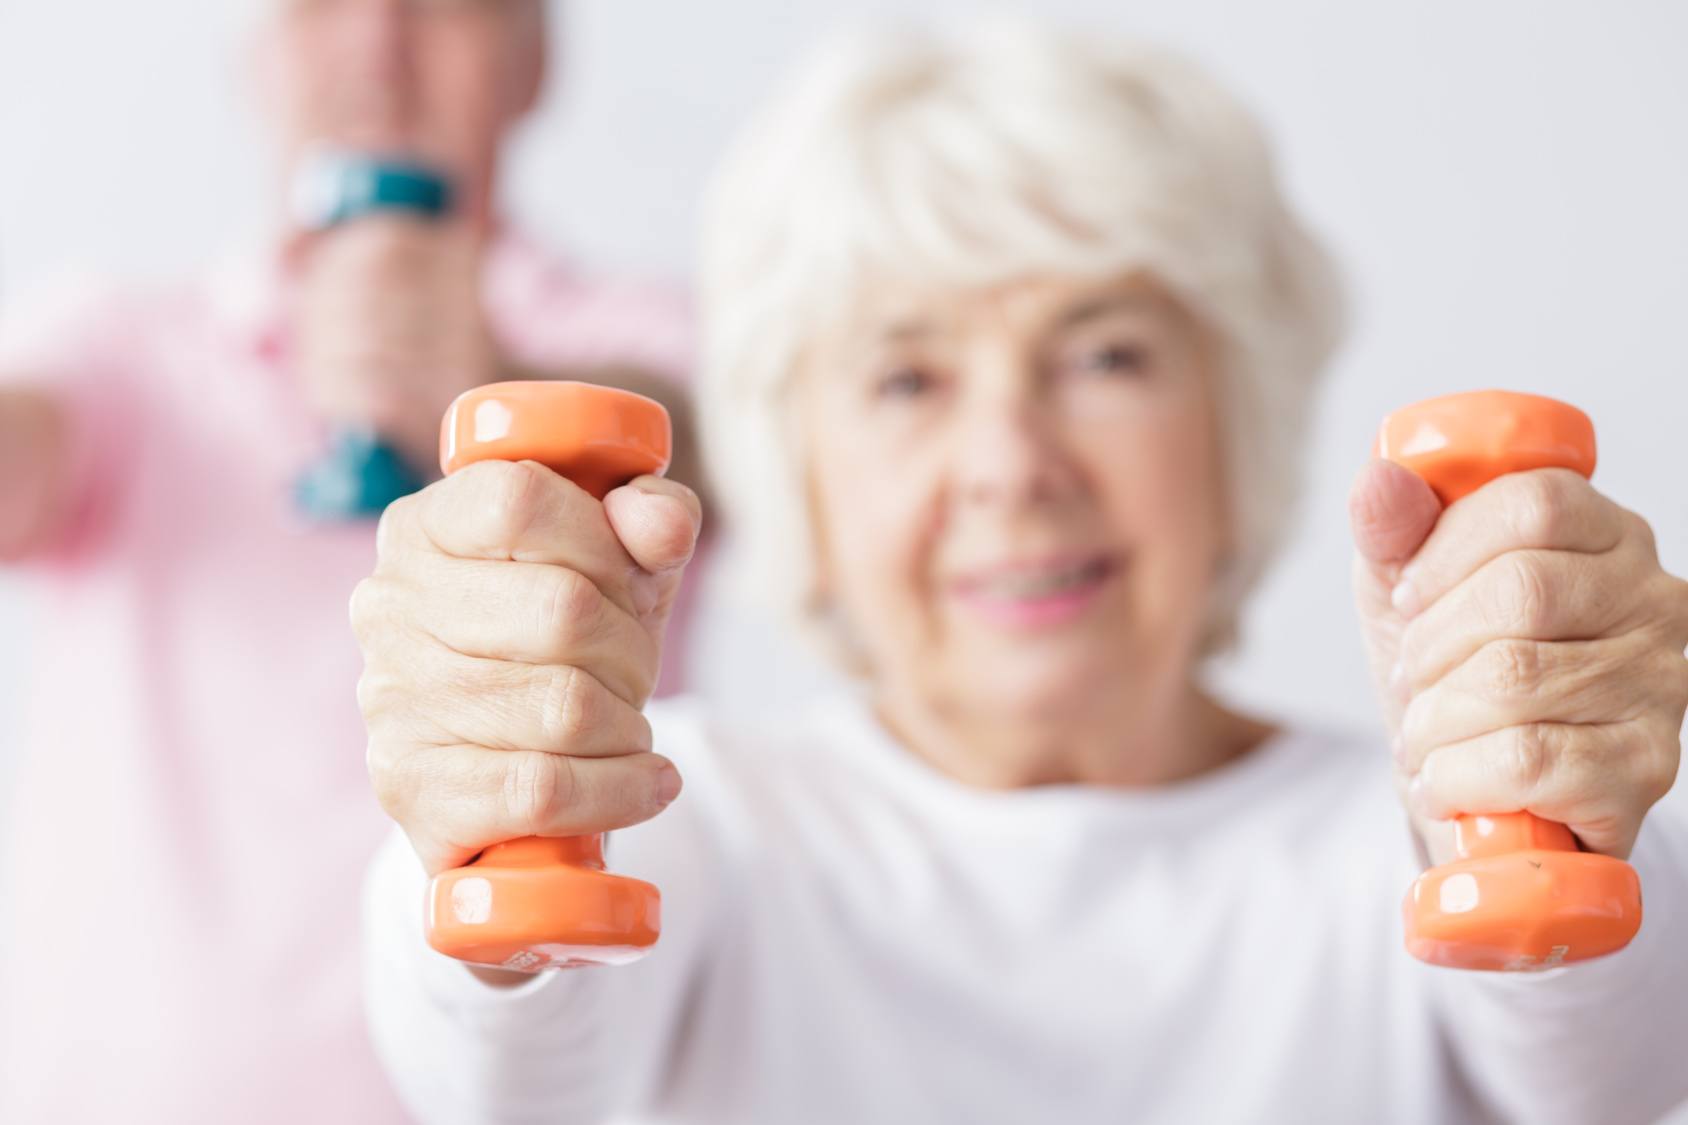 Do you want to maintain your strength, activity, mobility as an ageing adult?